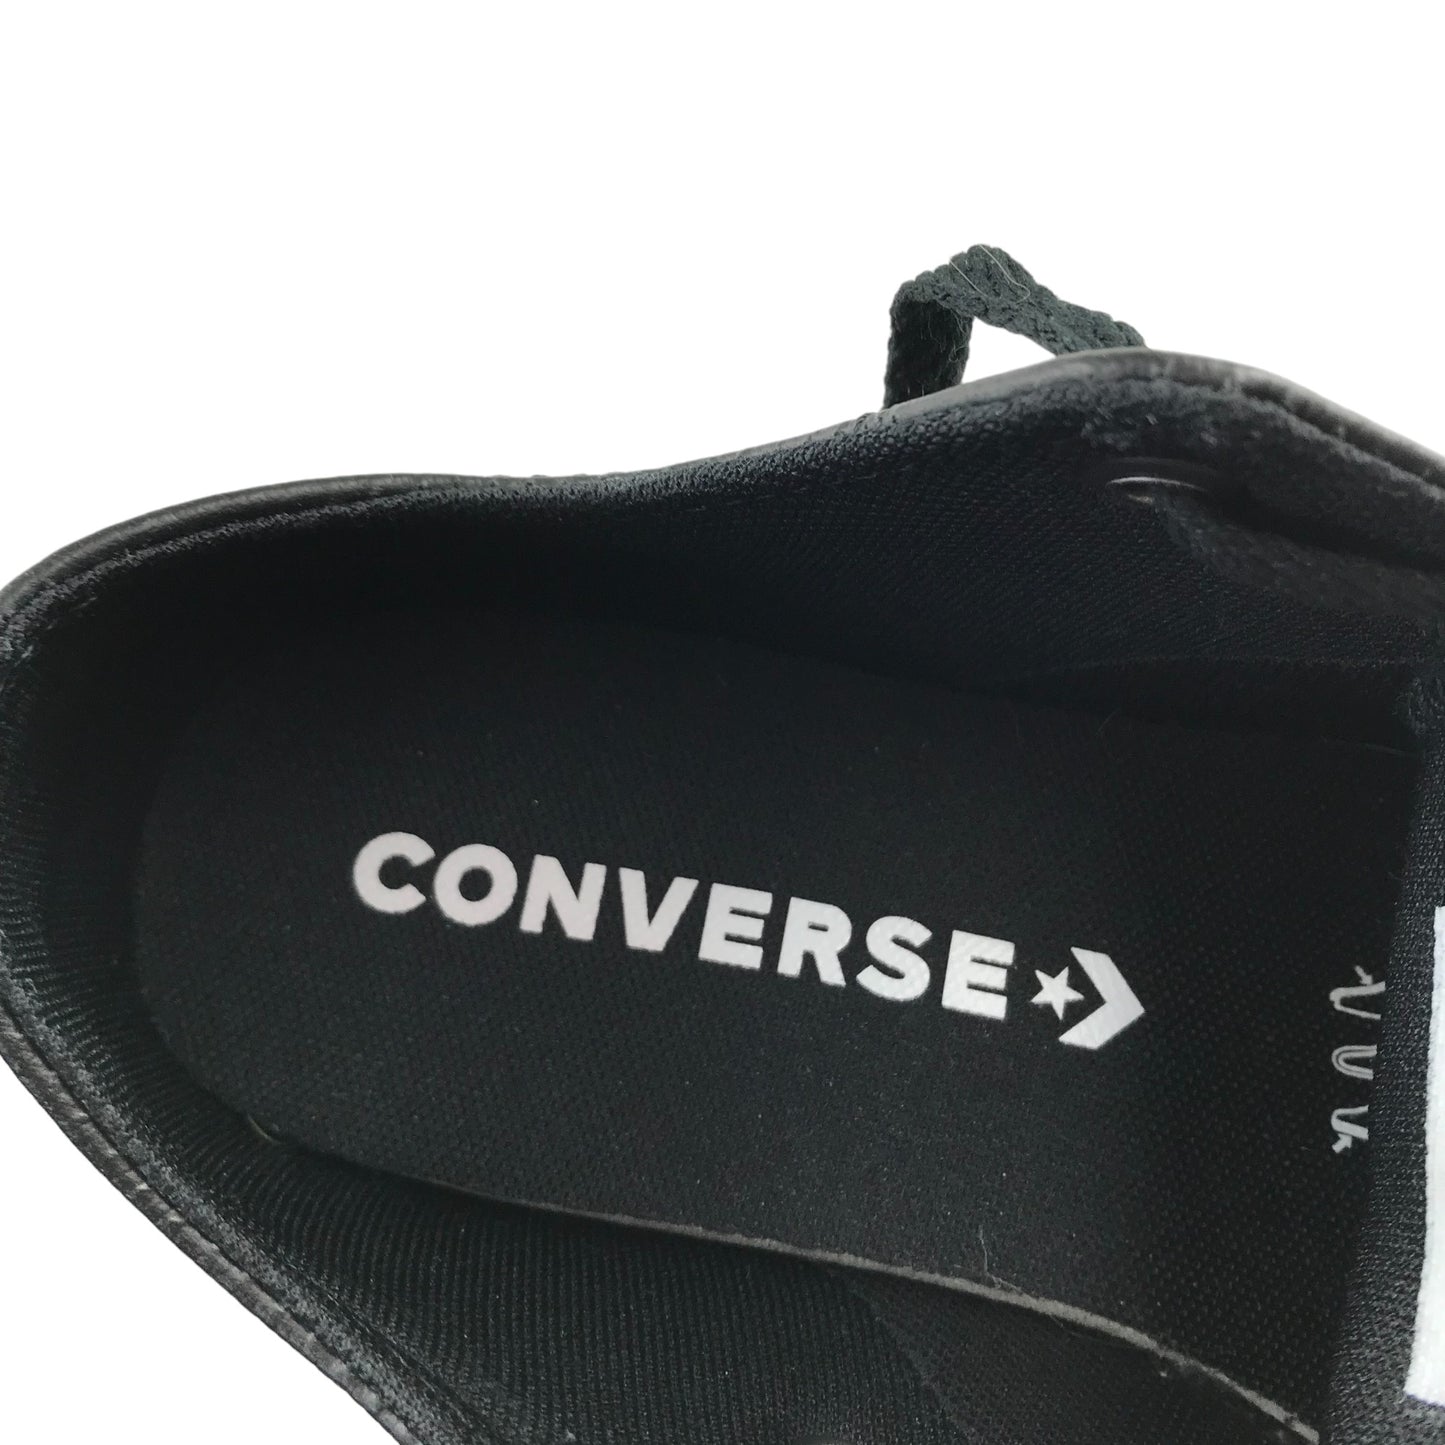 Converse Trainers Shoe Size 4 Black Leather All Star Chuck Taylor Low top